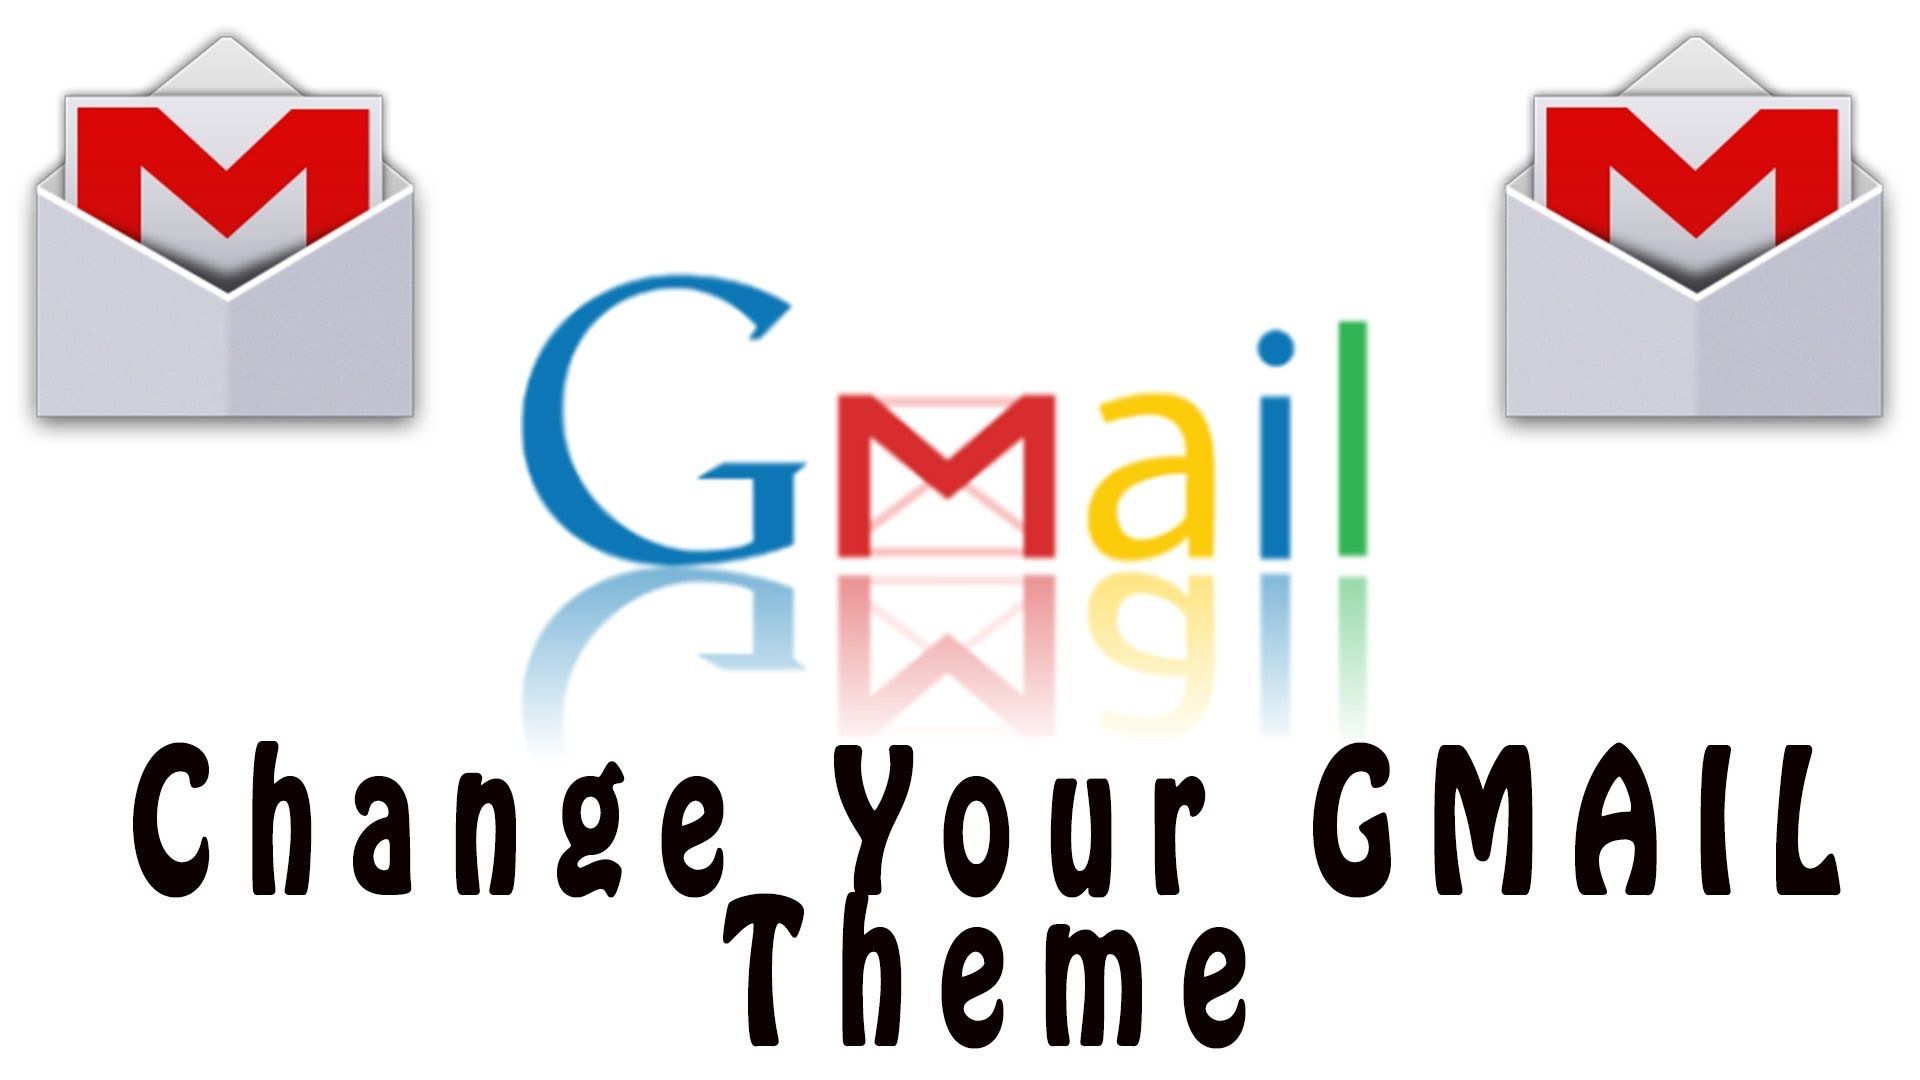 How to Change your Gmail Cool Theme Background Image In 2015 - YouTube